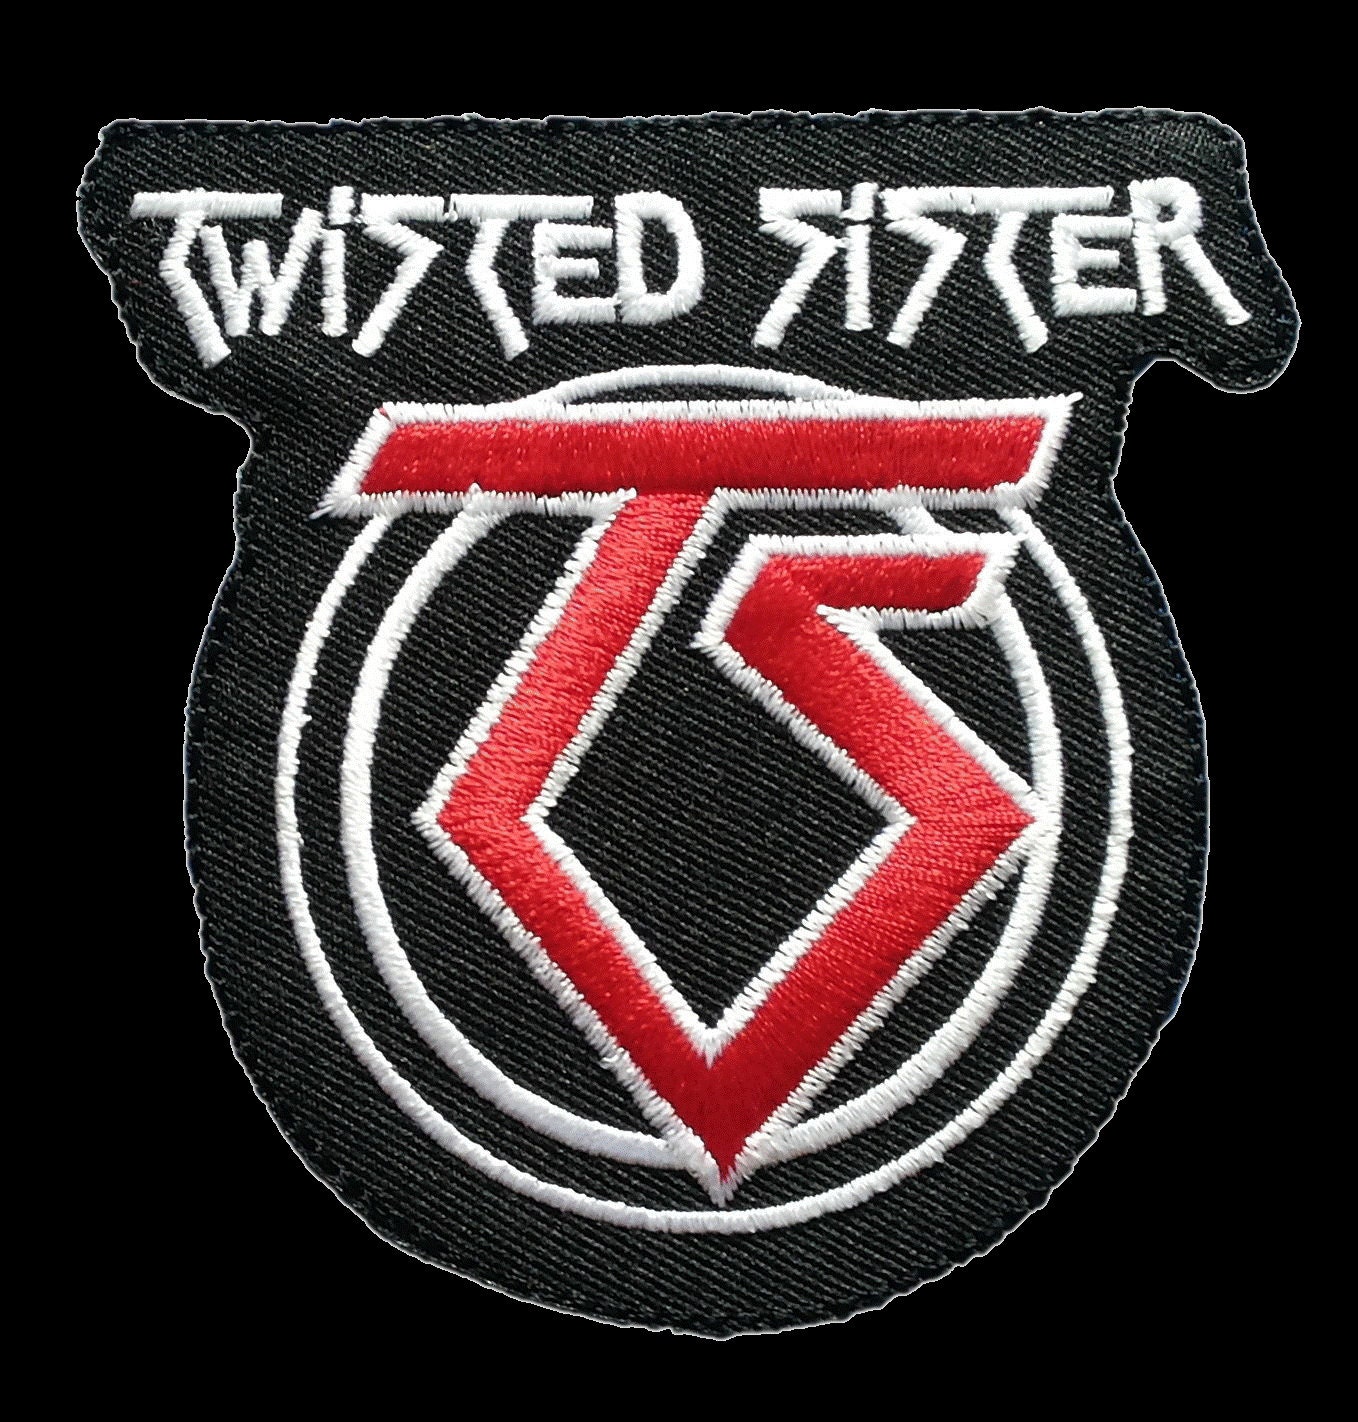 Twisted Sister Embroidered Iron On Badge Patch 3.5 by patchNbadge